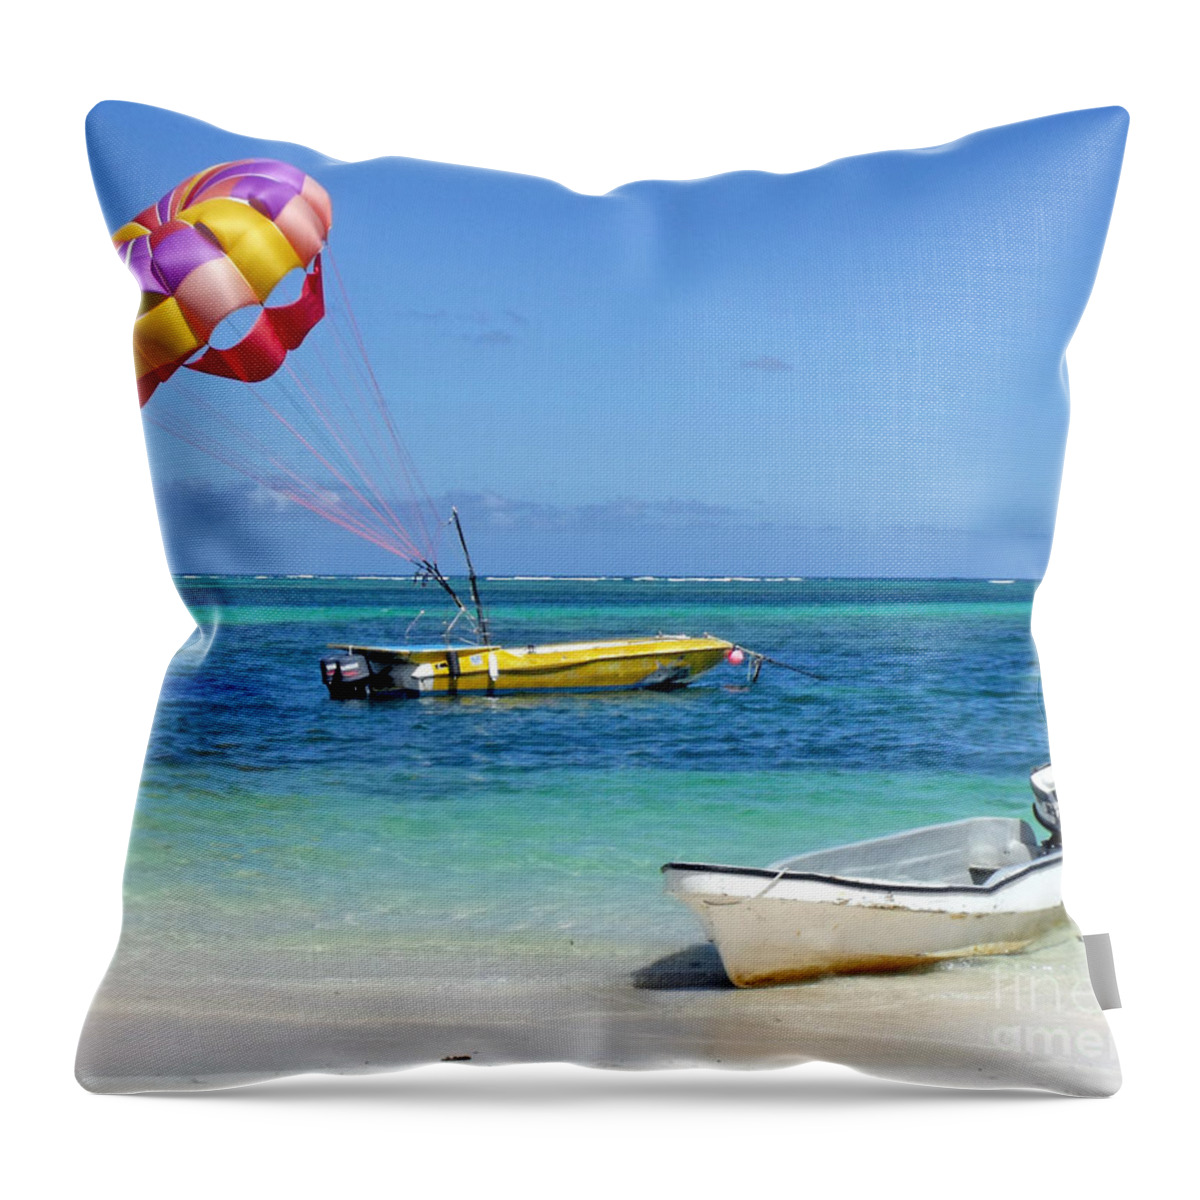 Colorful Parachute Throw Pillow featuring the photograph Colorful Parachute - Waiting to Parasail by Val Miller